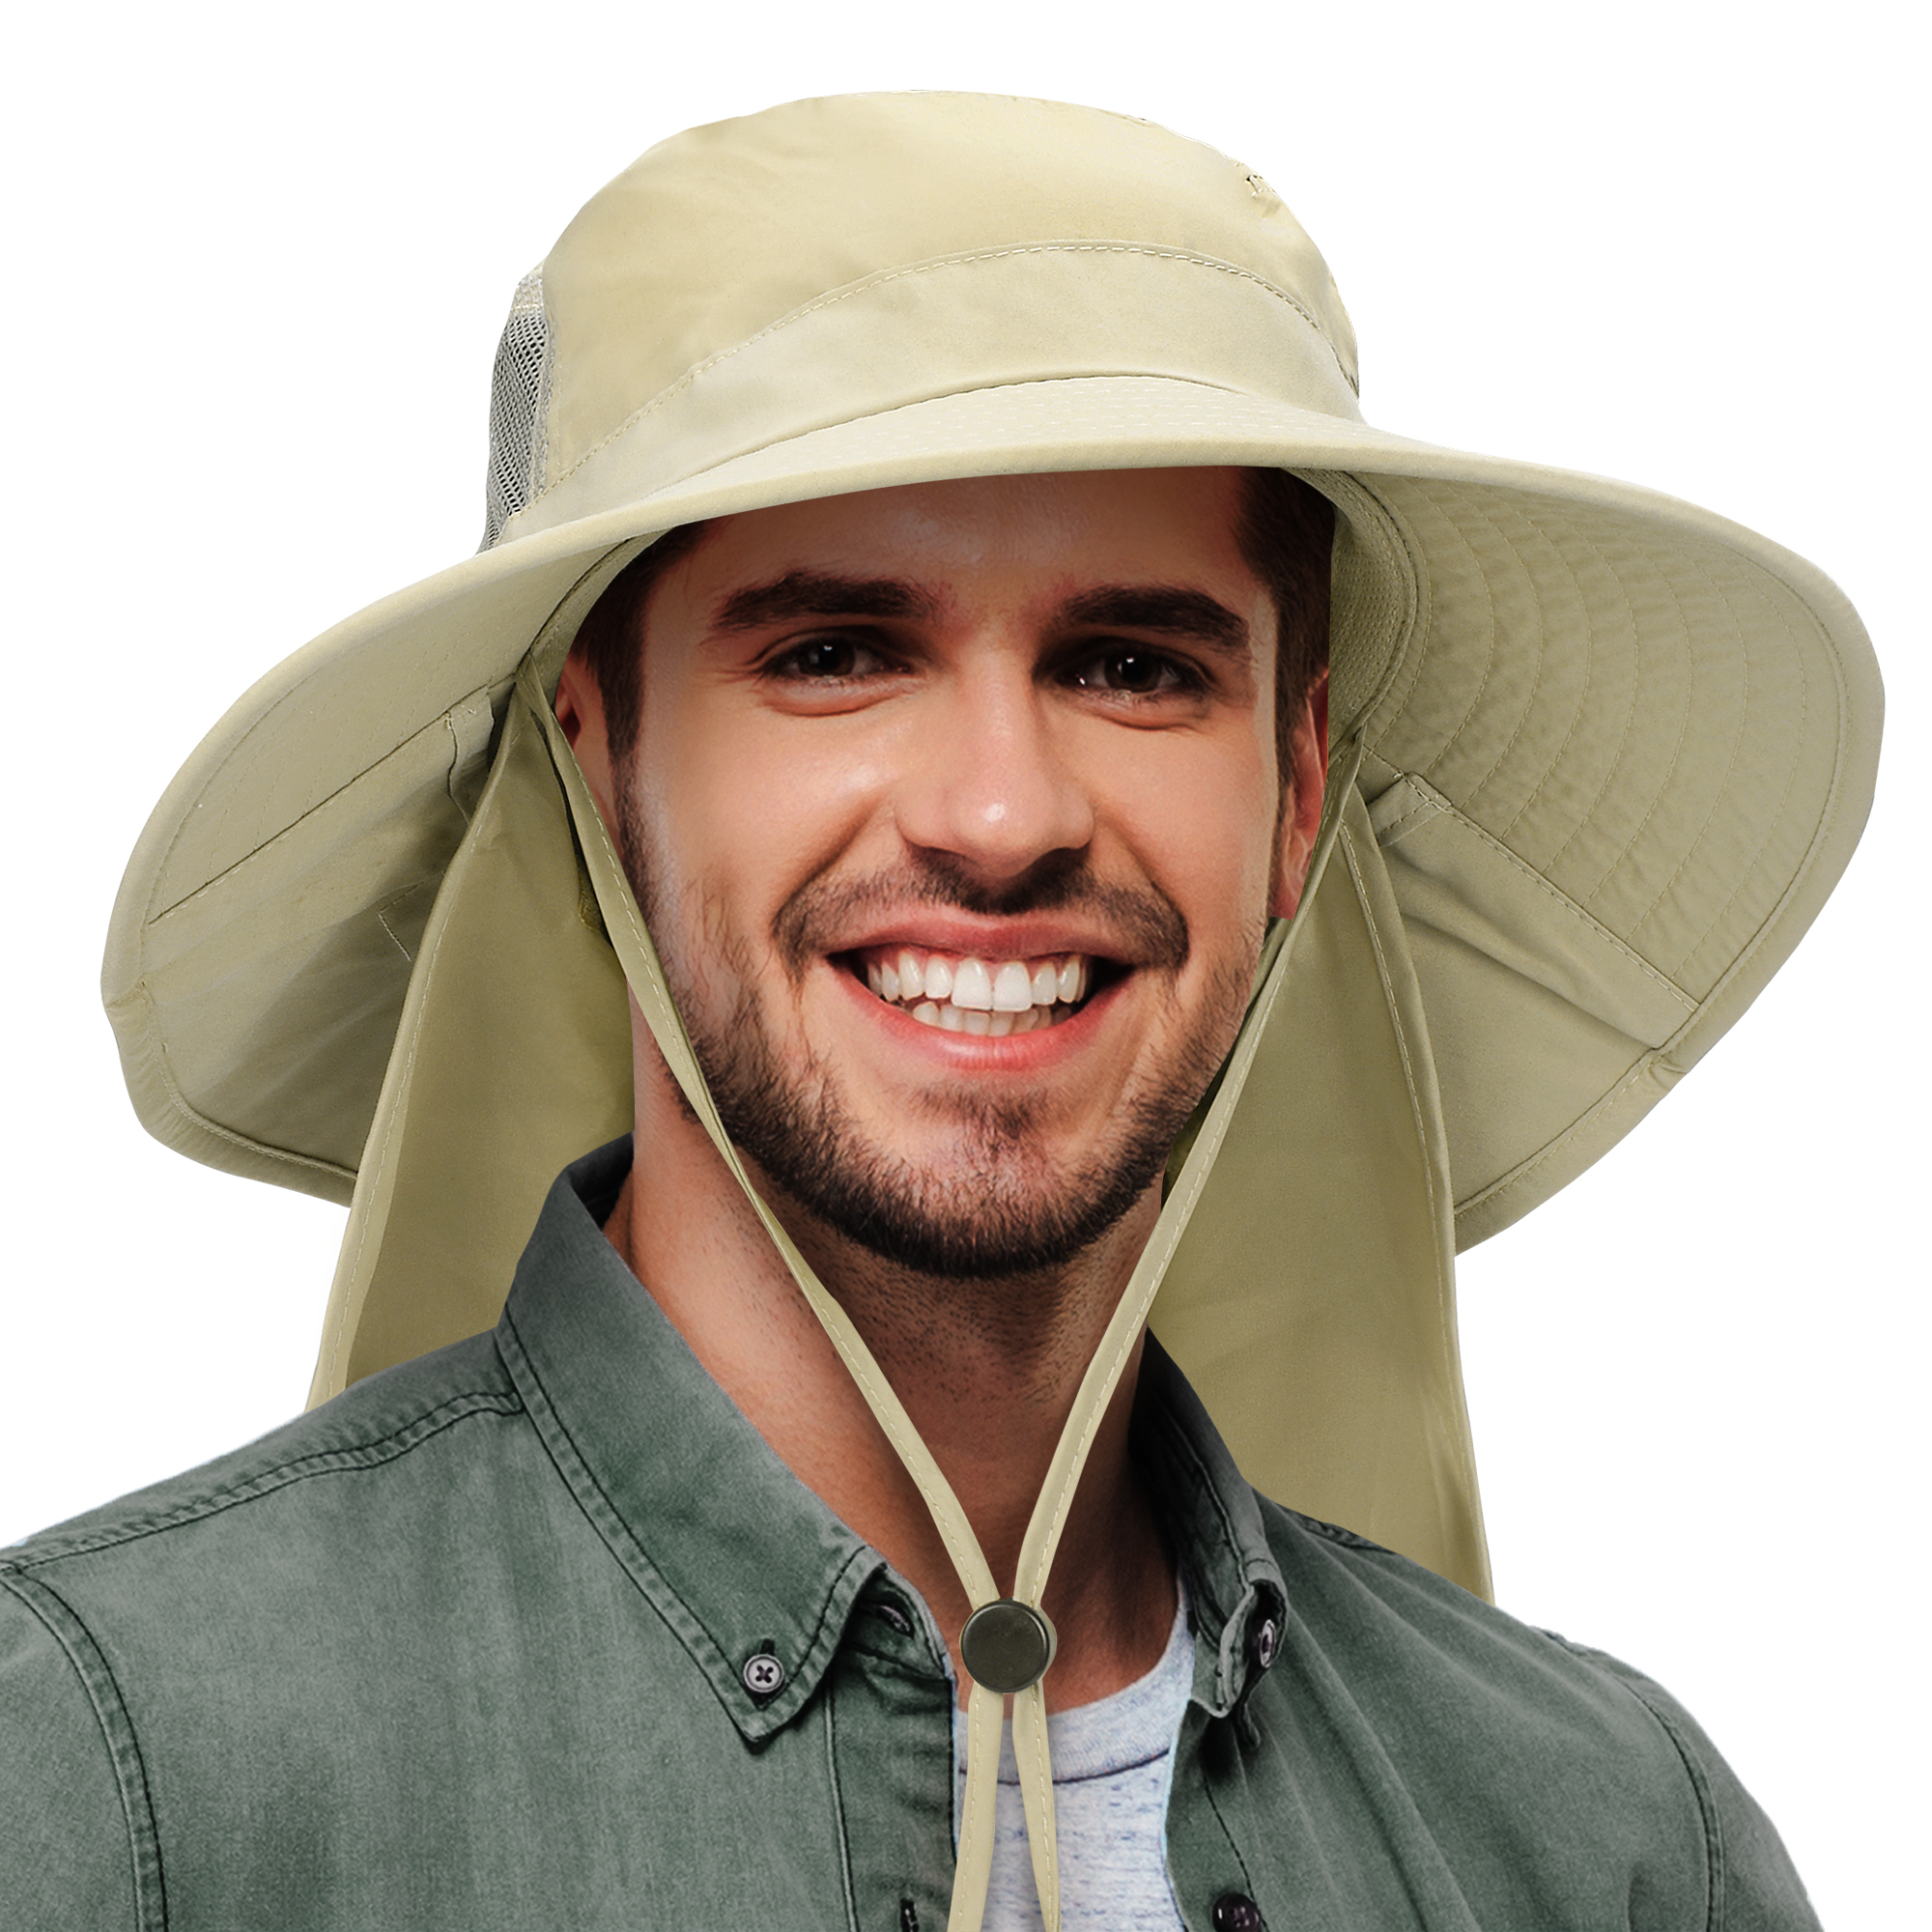 Men's Sun Hat with Neck Flap, Wide Brim Fishing Safari Hiking Hat, UPF 50+ Protection, Adjustable Chin Strap - image 1 of 7